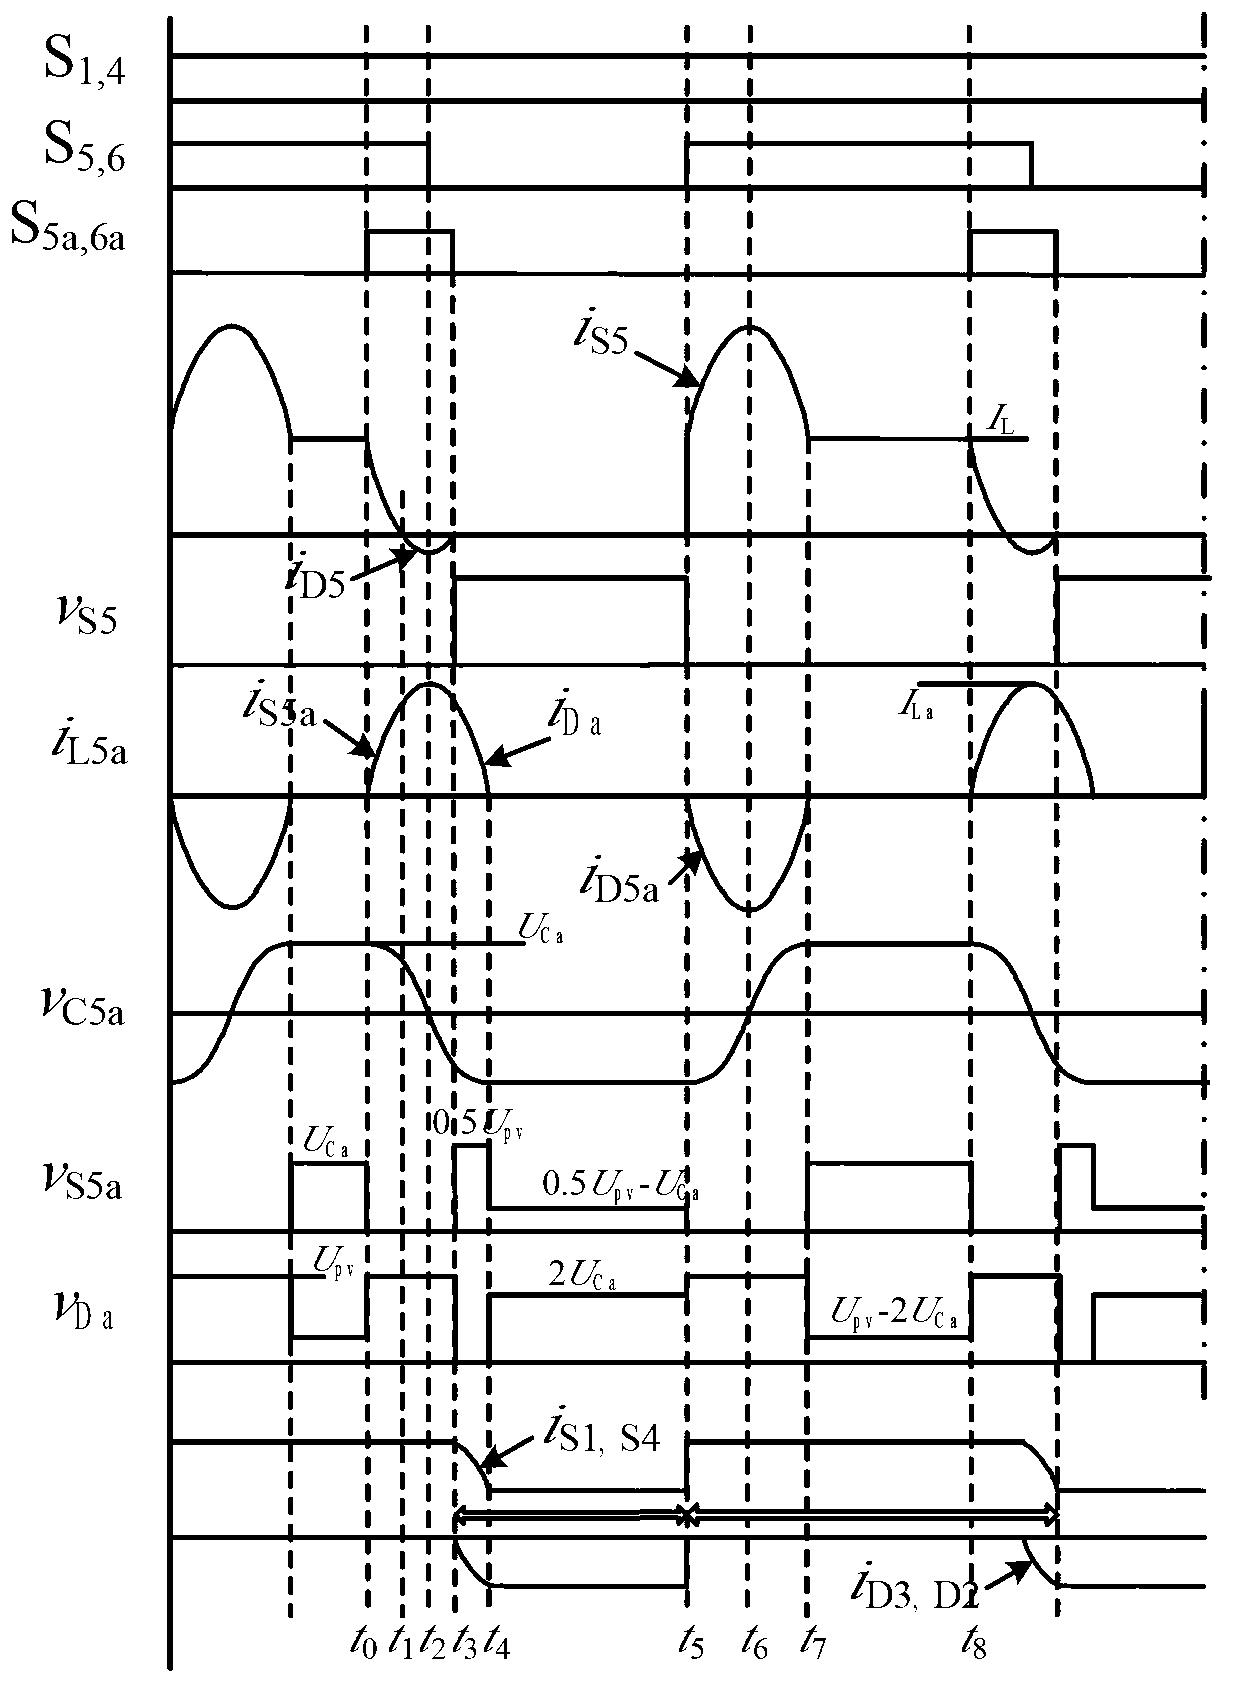 Zero current switching full-bridge type non-isolated photovoltaic grid-connected inverter